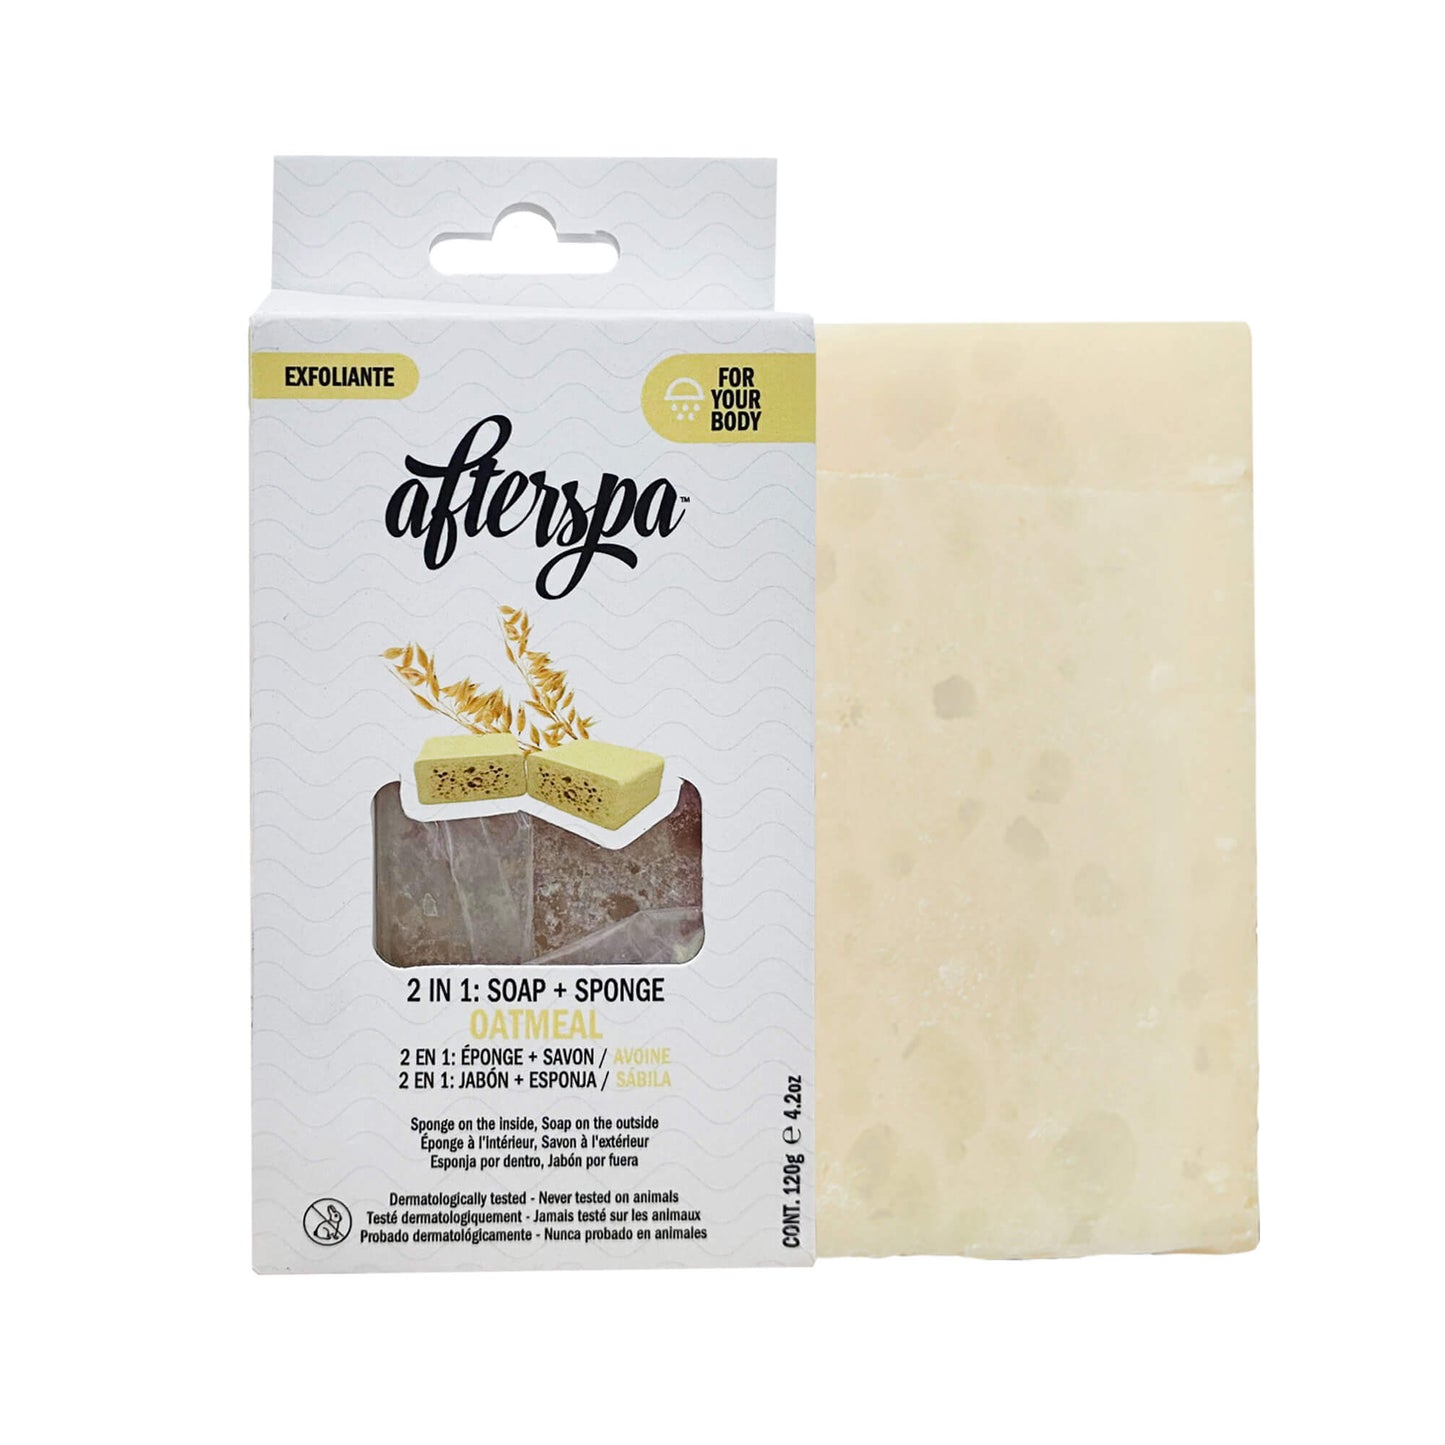 Oatmeal Soap Sponge - Afterspa -  Spa experience at home